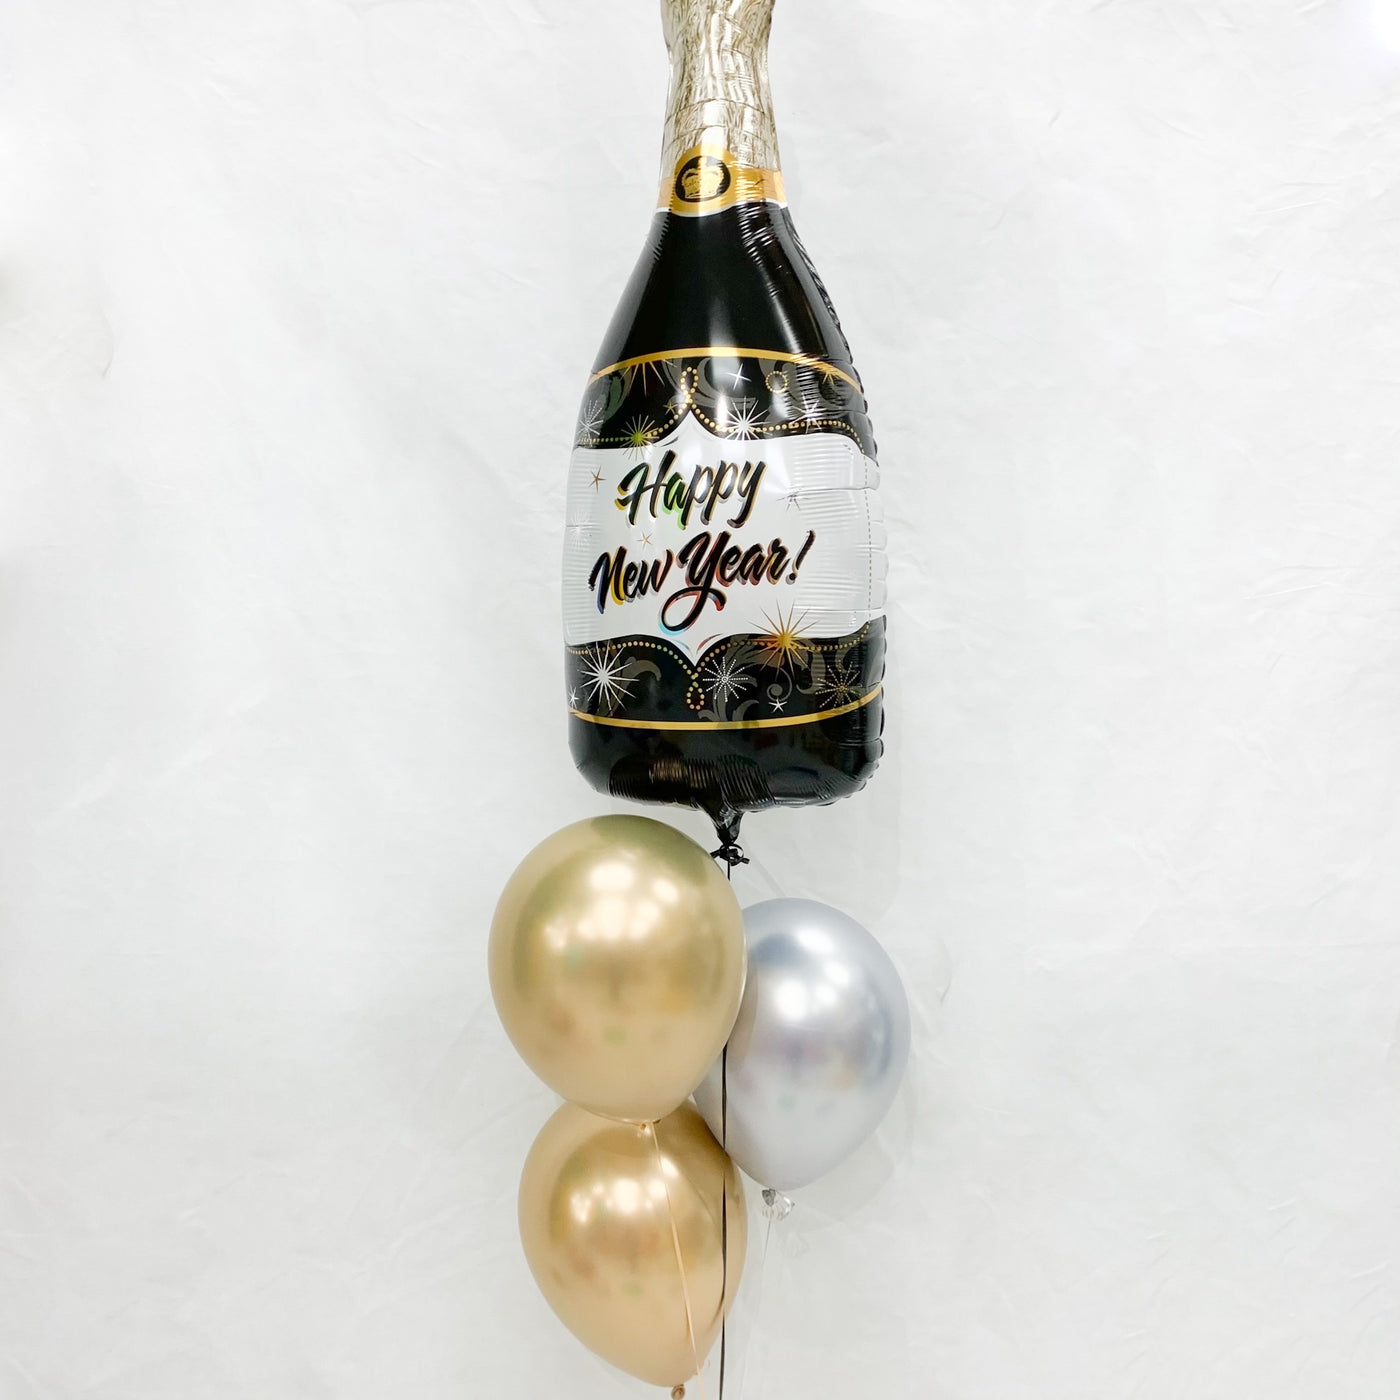 Champagne New Year Balloon bouquet